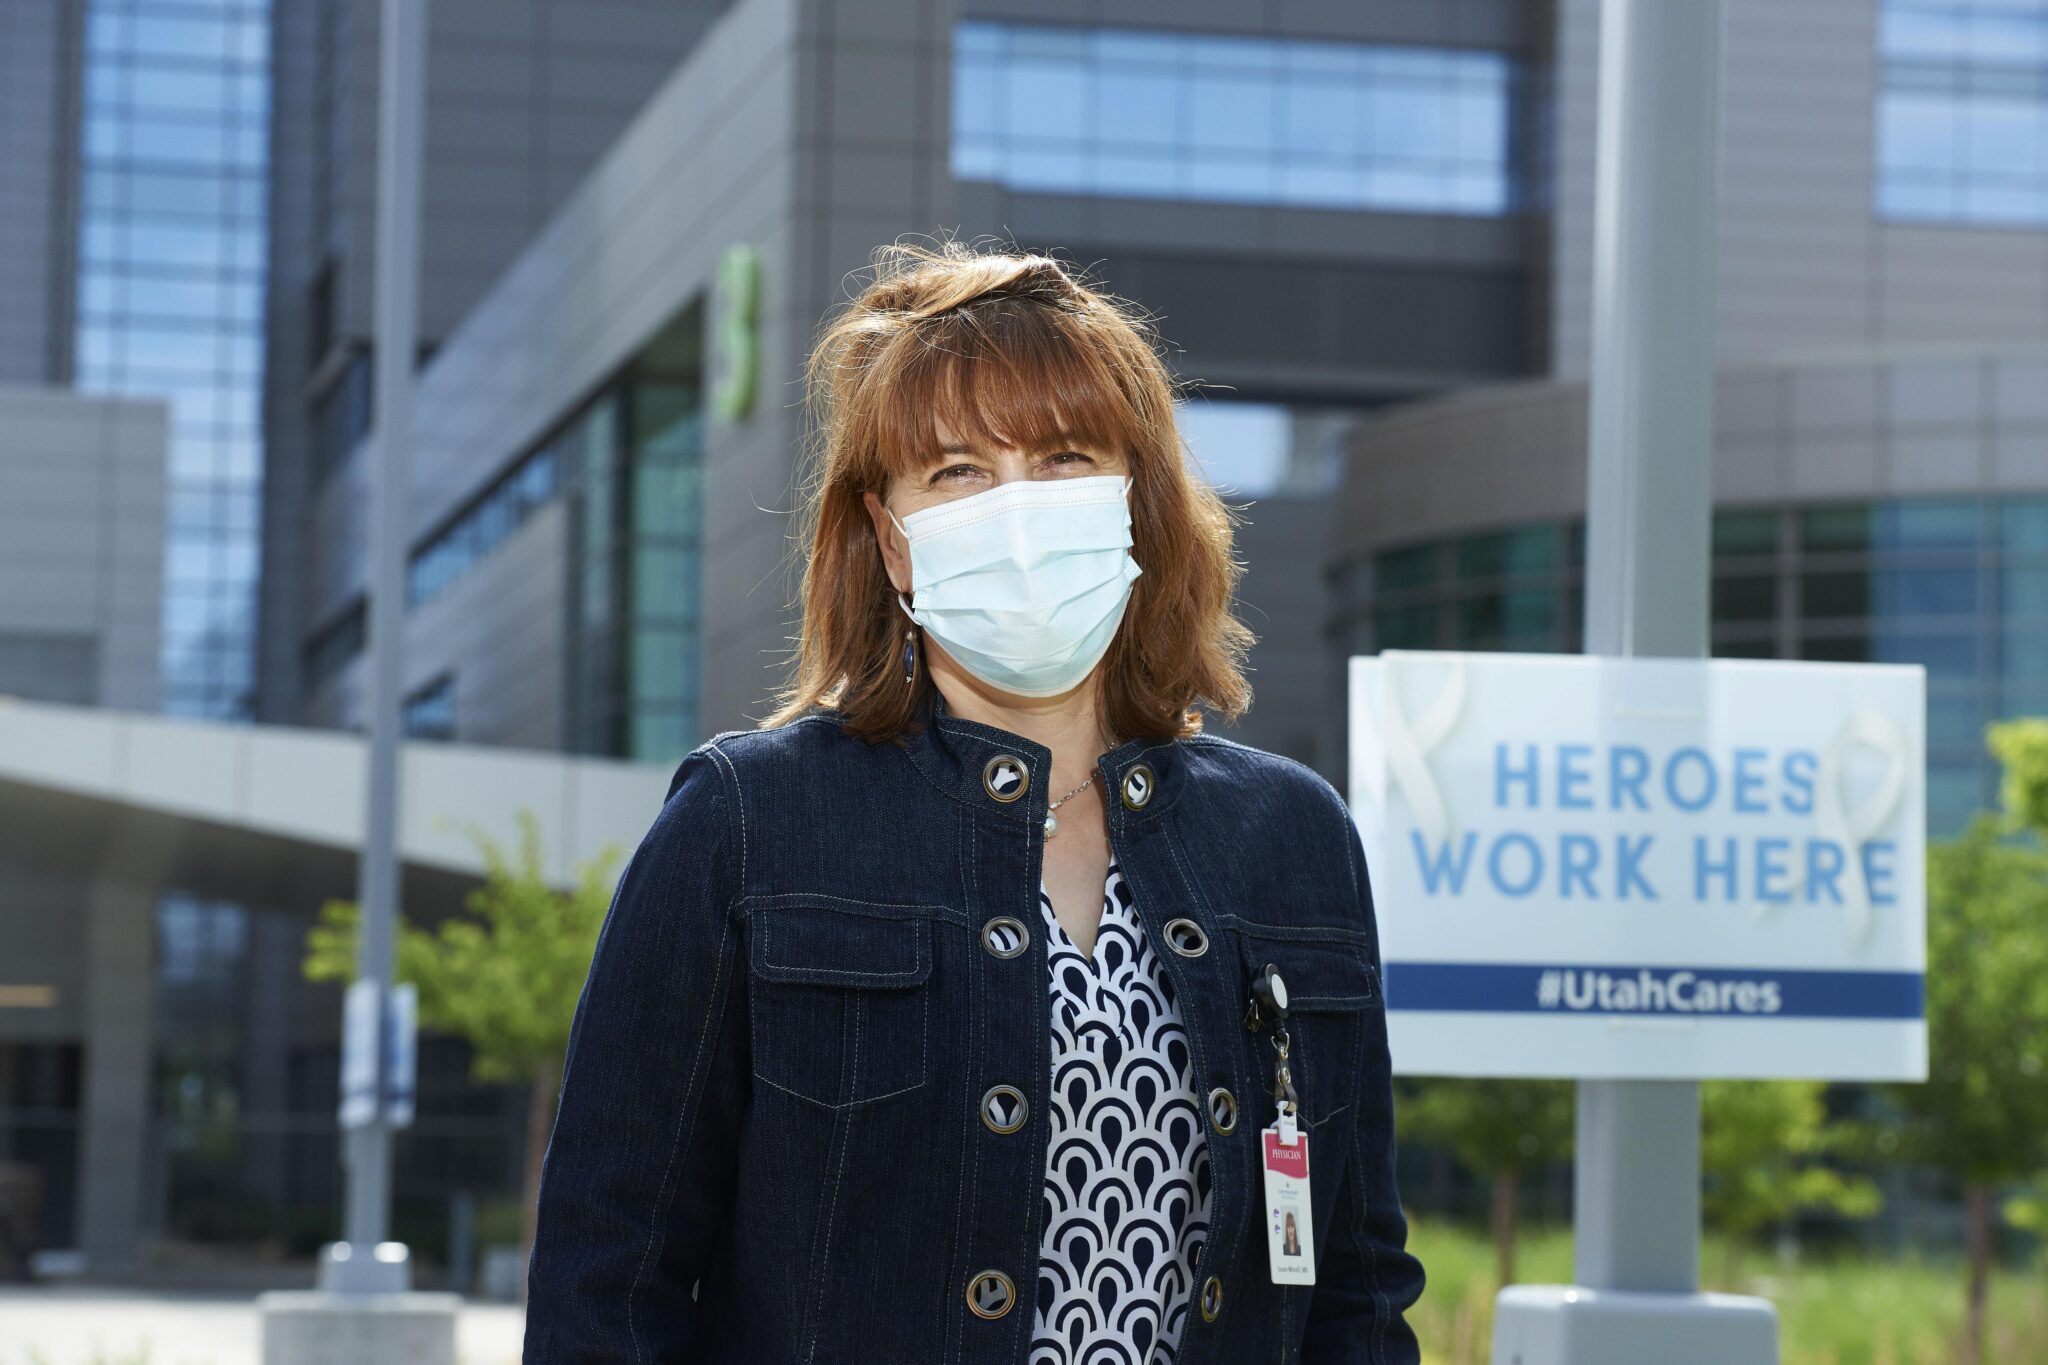 In front of a hospital, a woman in street clothes wearing a medical mask and ID on a lanyard stands in front of a sign saying, "Heroes Work Here."